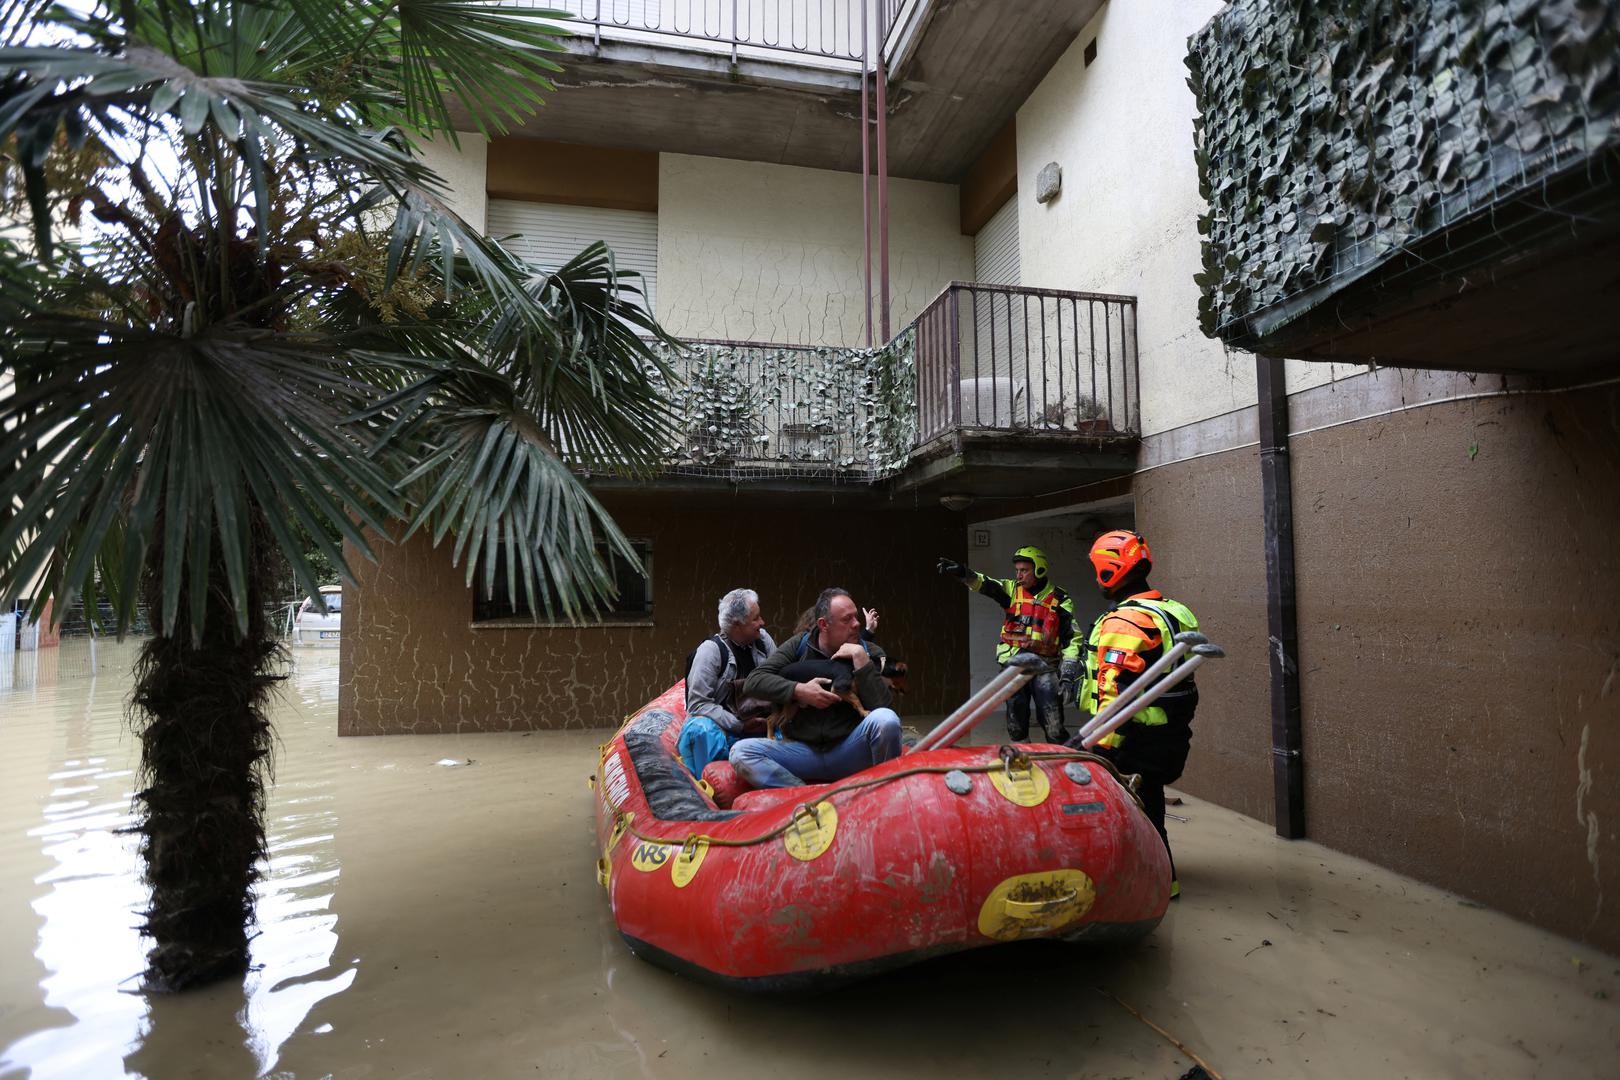 Firefighters evacuate people with a dog from a flooded house, after heavy rains hit Italy's Emilia Romagna region, in Faenza, Italy, May 18, 2023. REUTERS/Claudia Greco Photo: CLAUDIA GRECO/REUTERS